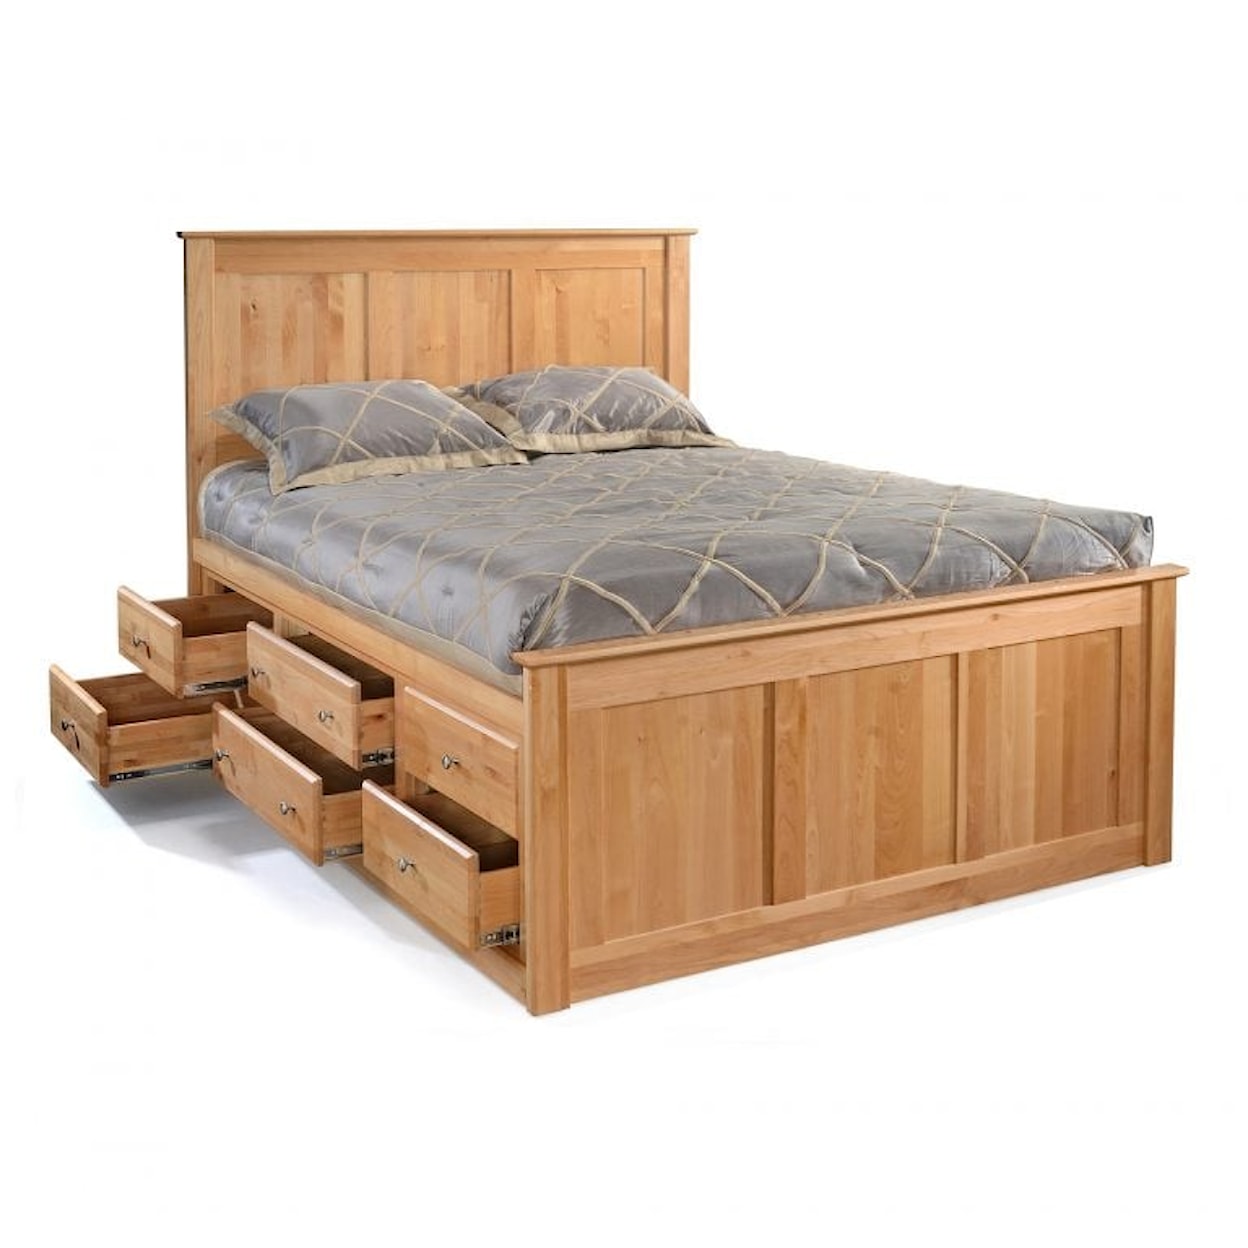 Archbold Furniture Chest Bed King 9-Drawer Chest Bed